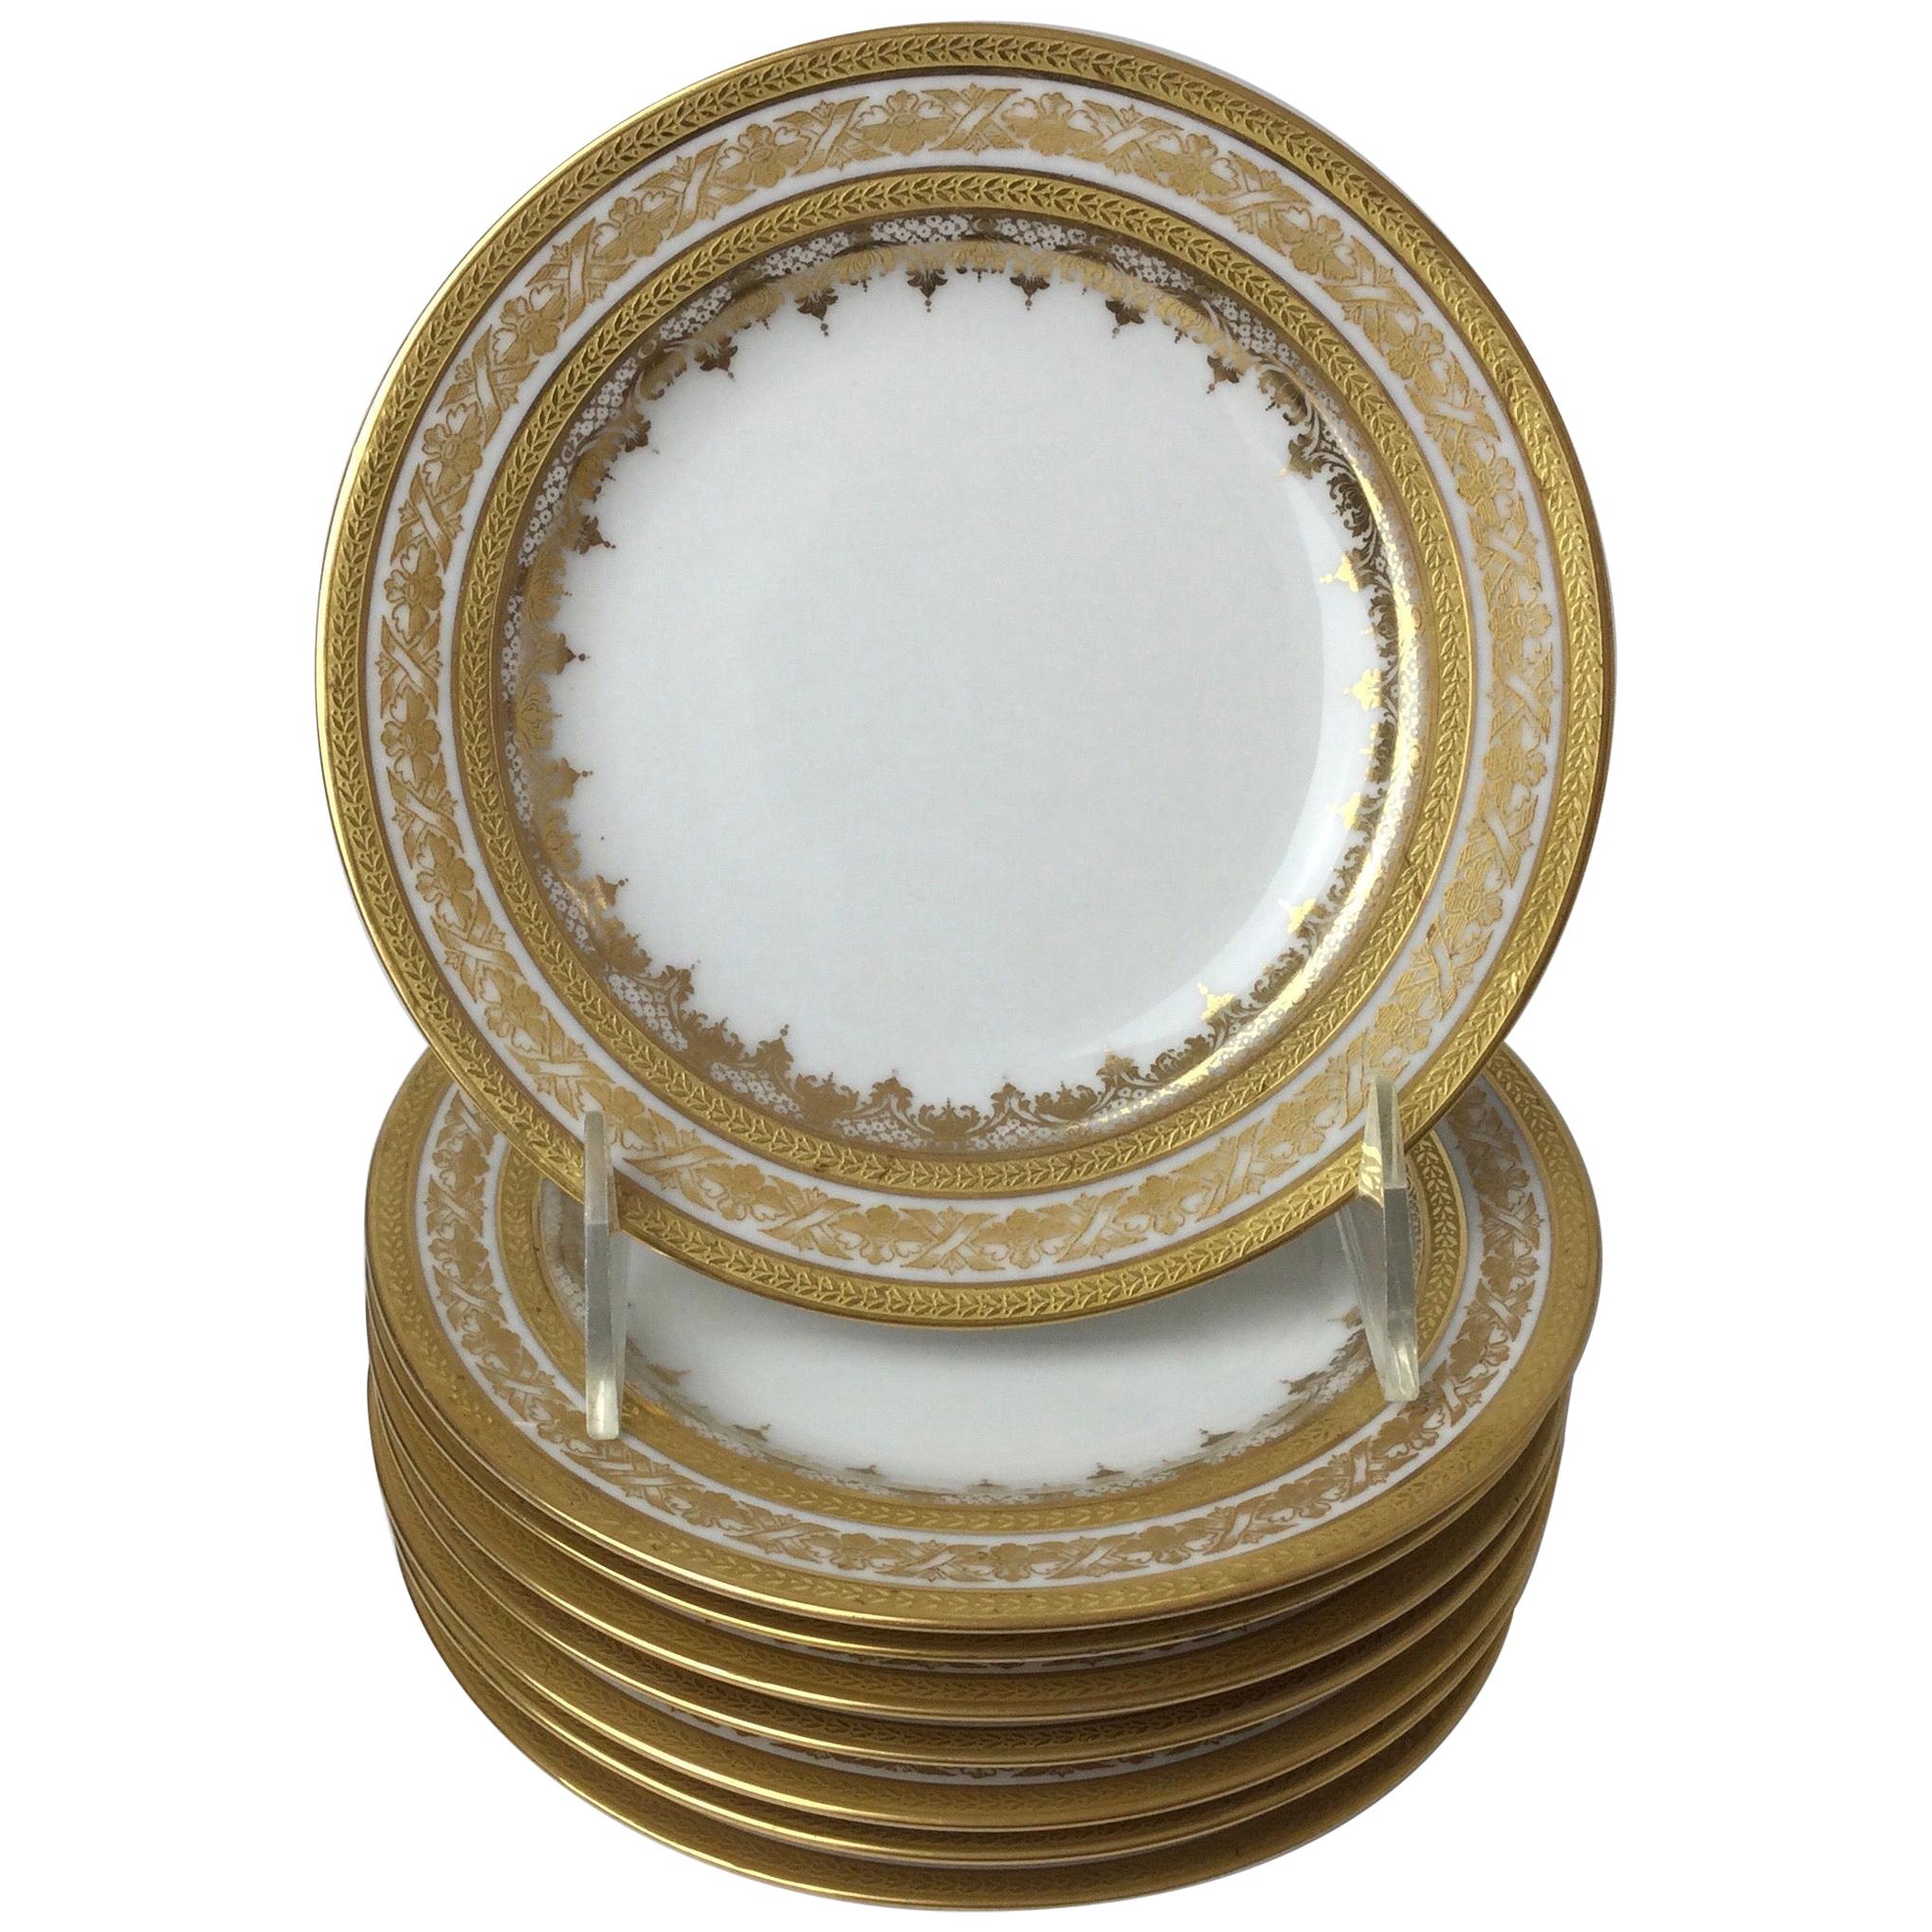 Set of 8 Limoges Gold Encrusted Bread and Butter Plates